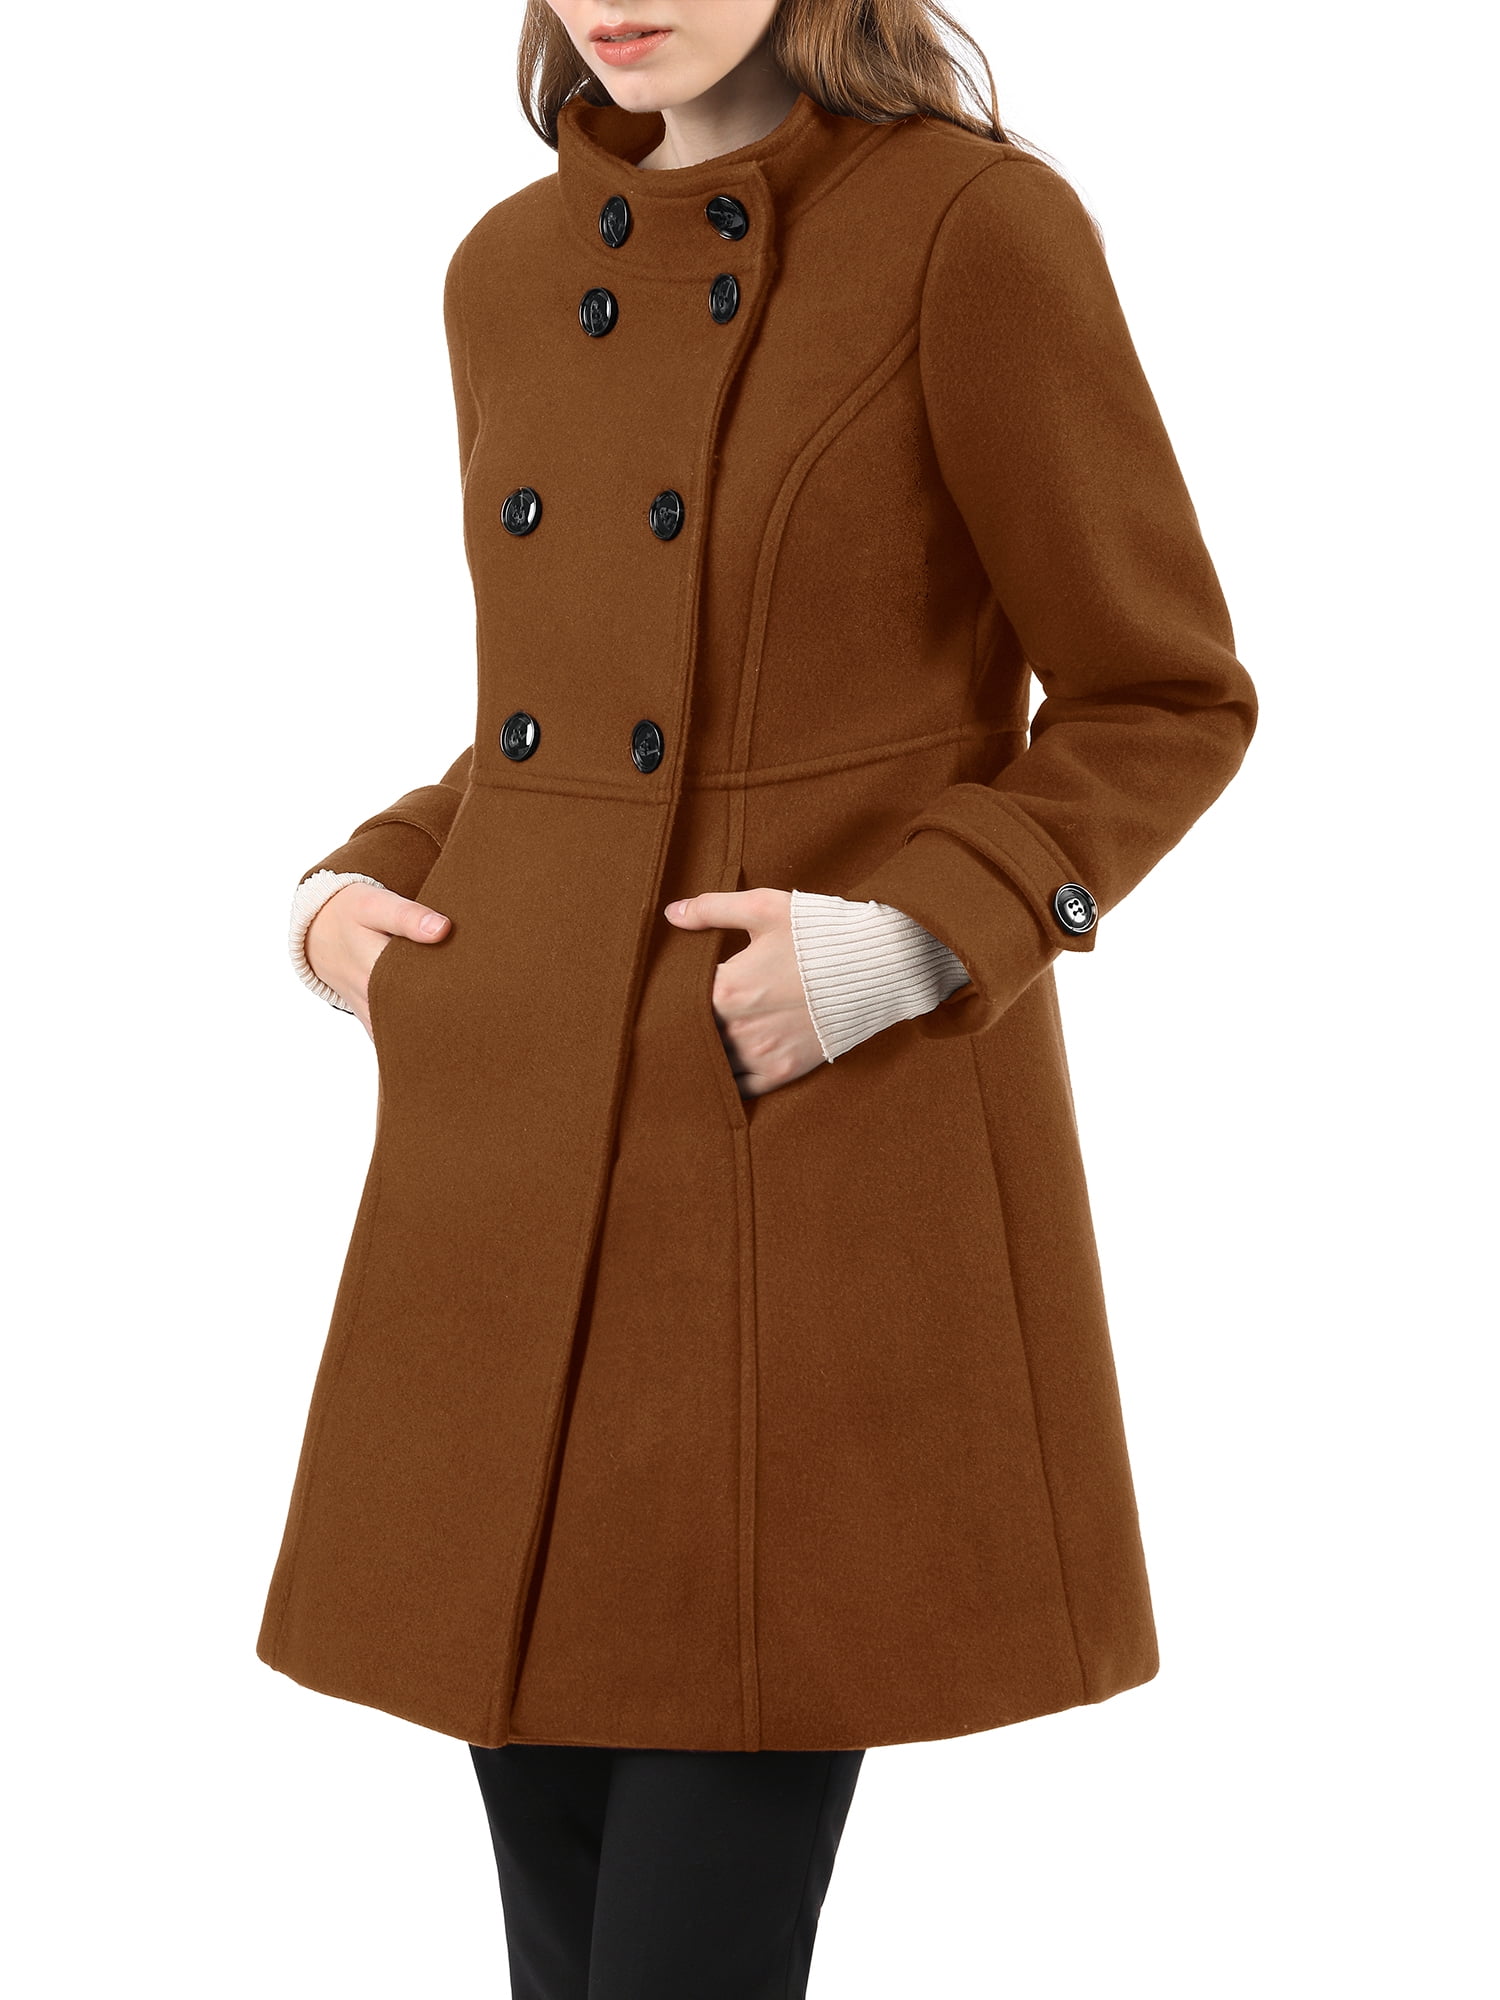 Allegra K Women's Stand Collar Long Sleeves Double Breasted Trendy Winter  Coat 